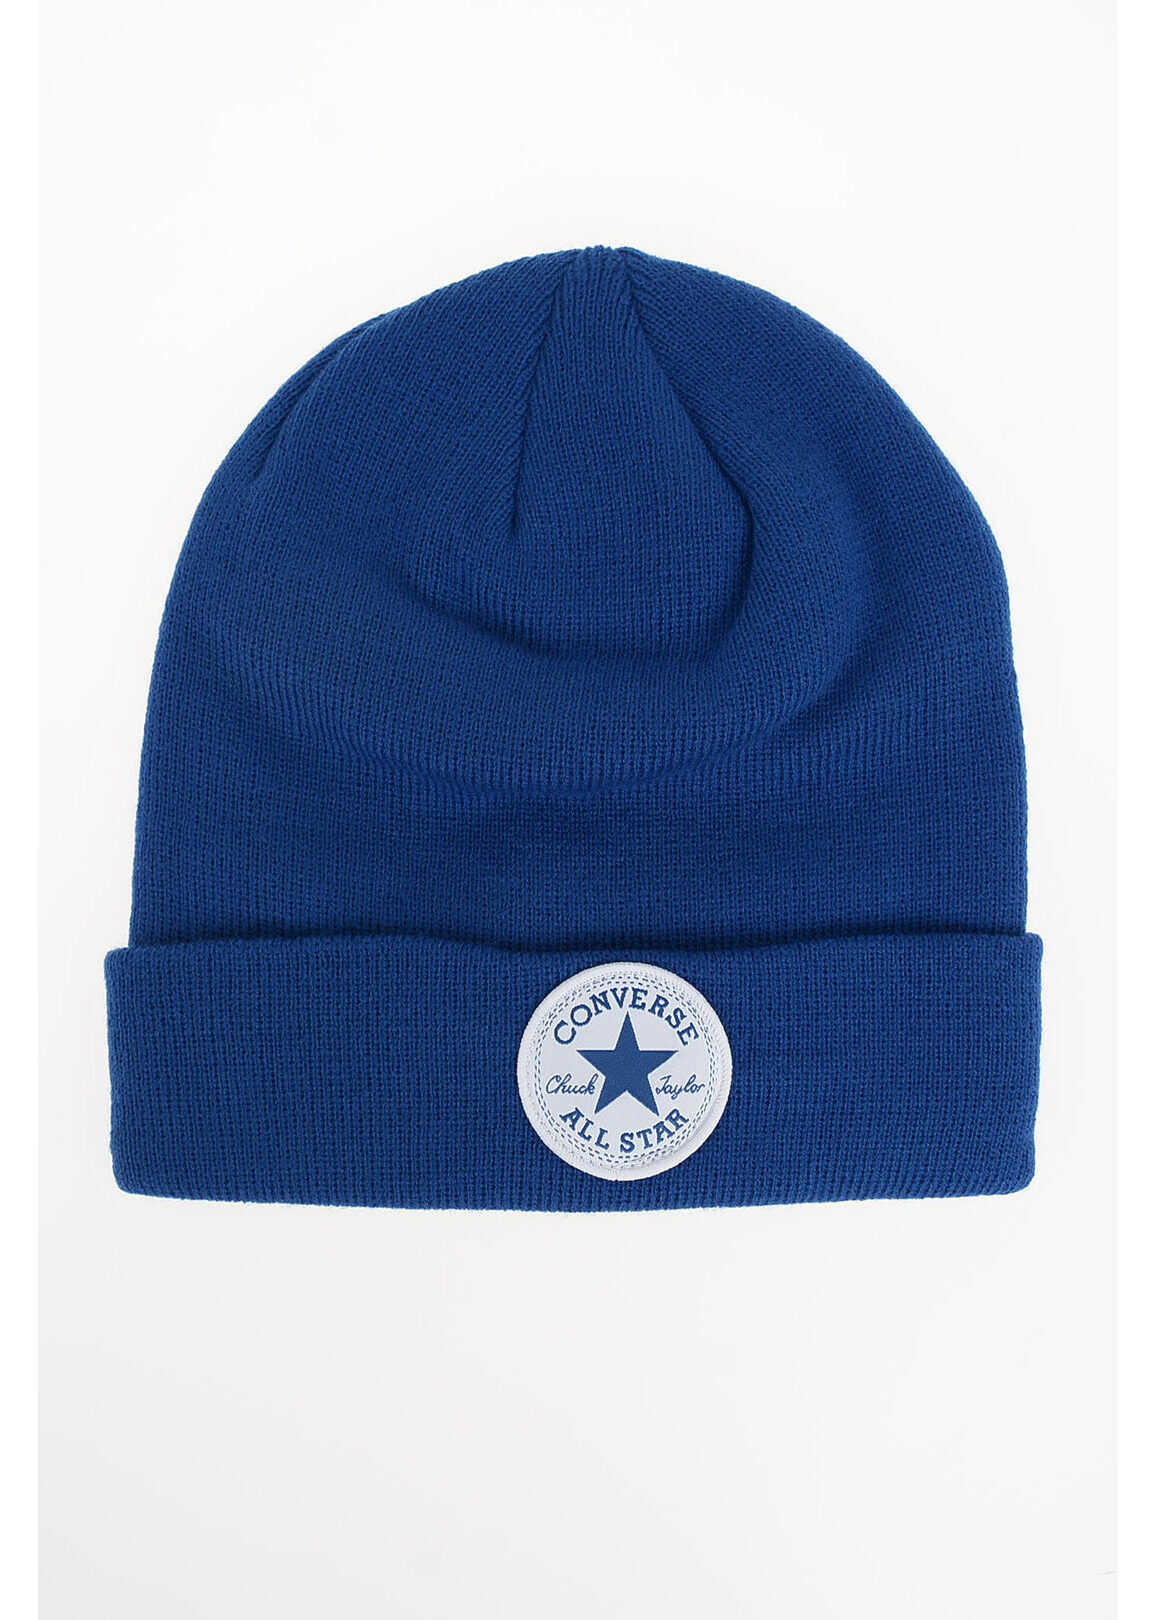 Converse Kids All Star Ribbed Beanie With Logo Blue image10